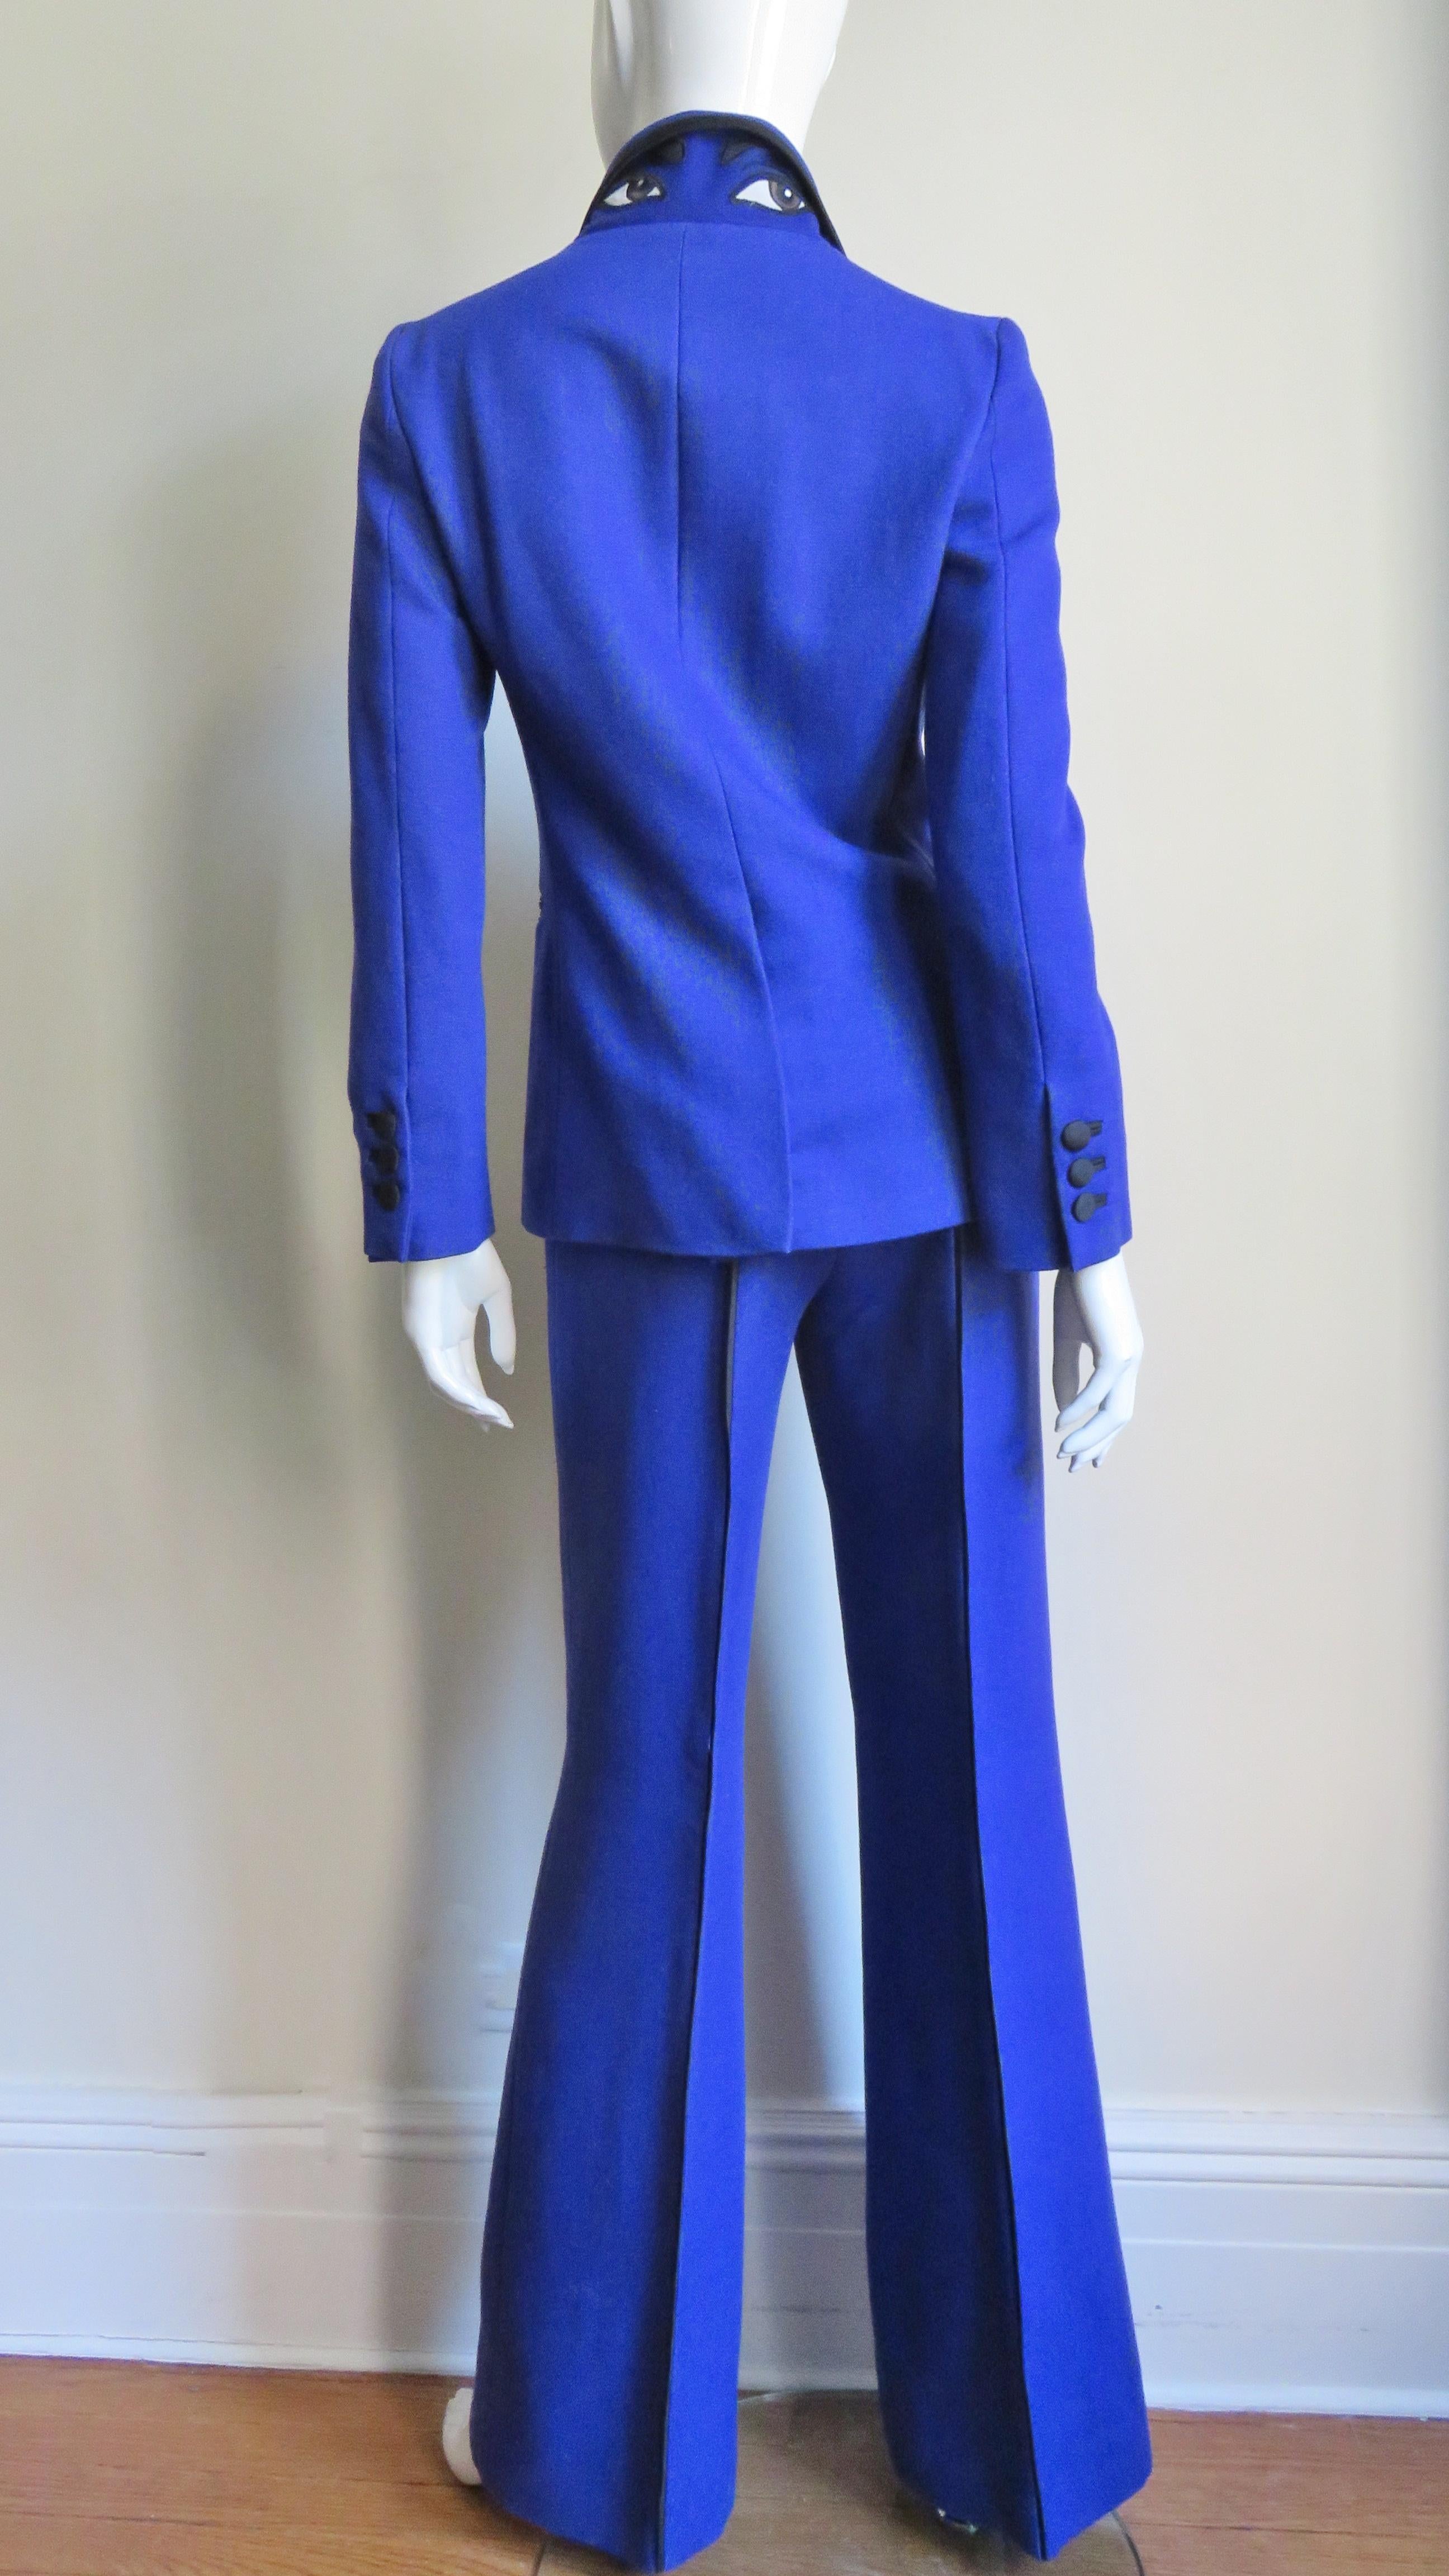 A fabulous bright blue wool pant and jacket suit from Moschino with detailed embroidered appliques of eyes and eyebrows on the back collar.  The jacket has a lapel collar,  breast pocket, front black button closing, button cuffs and hip pockets all